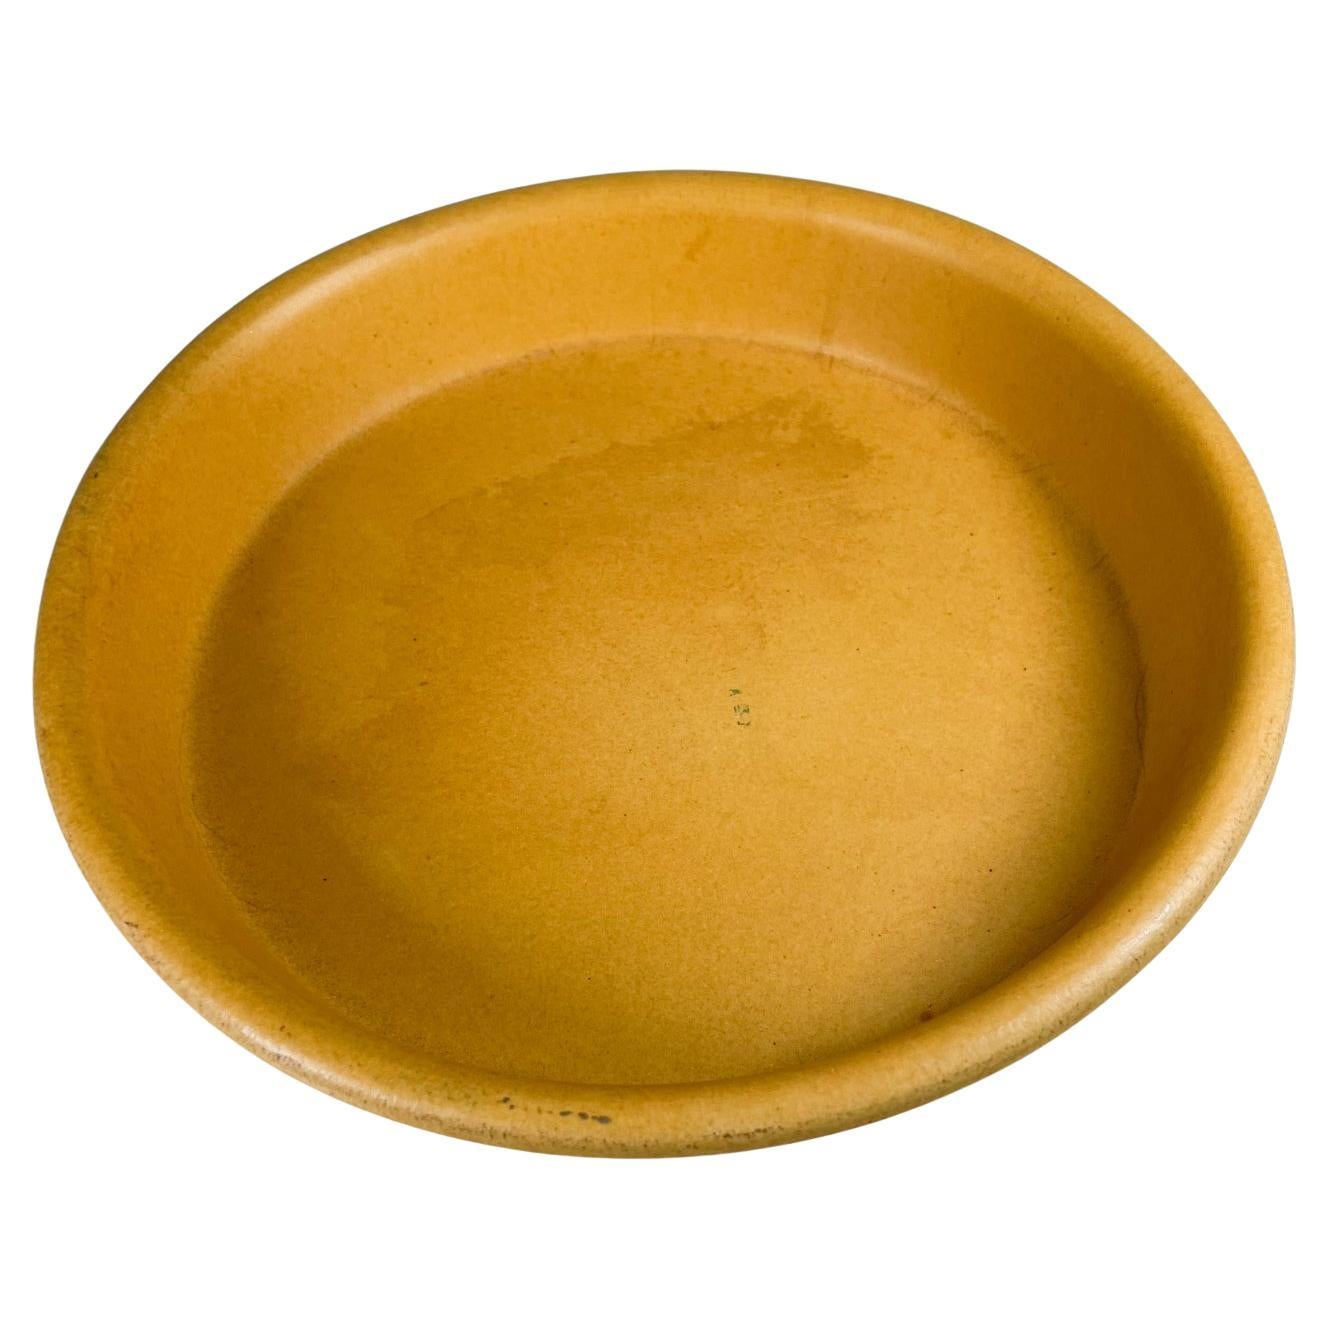 1960s Stoneware Yellow Dish by Bennington Potters 1883 Vermont
Yellow Dish Art Pottery
Stamped Bennington Potters Vermont 1883
10.75 diameter x 2 h
Original vintage condition.
See all images please.